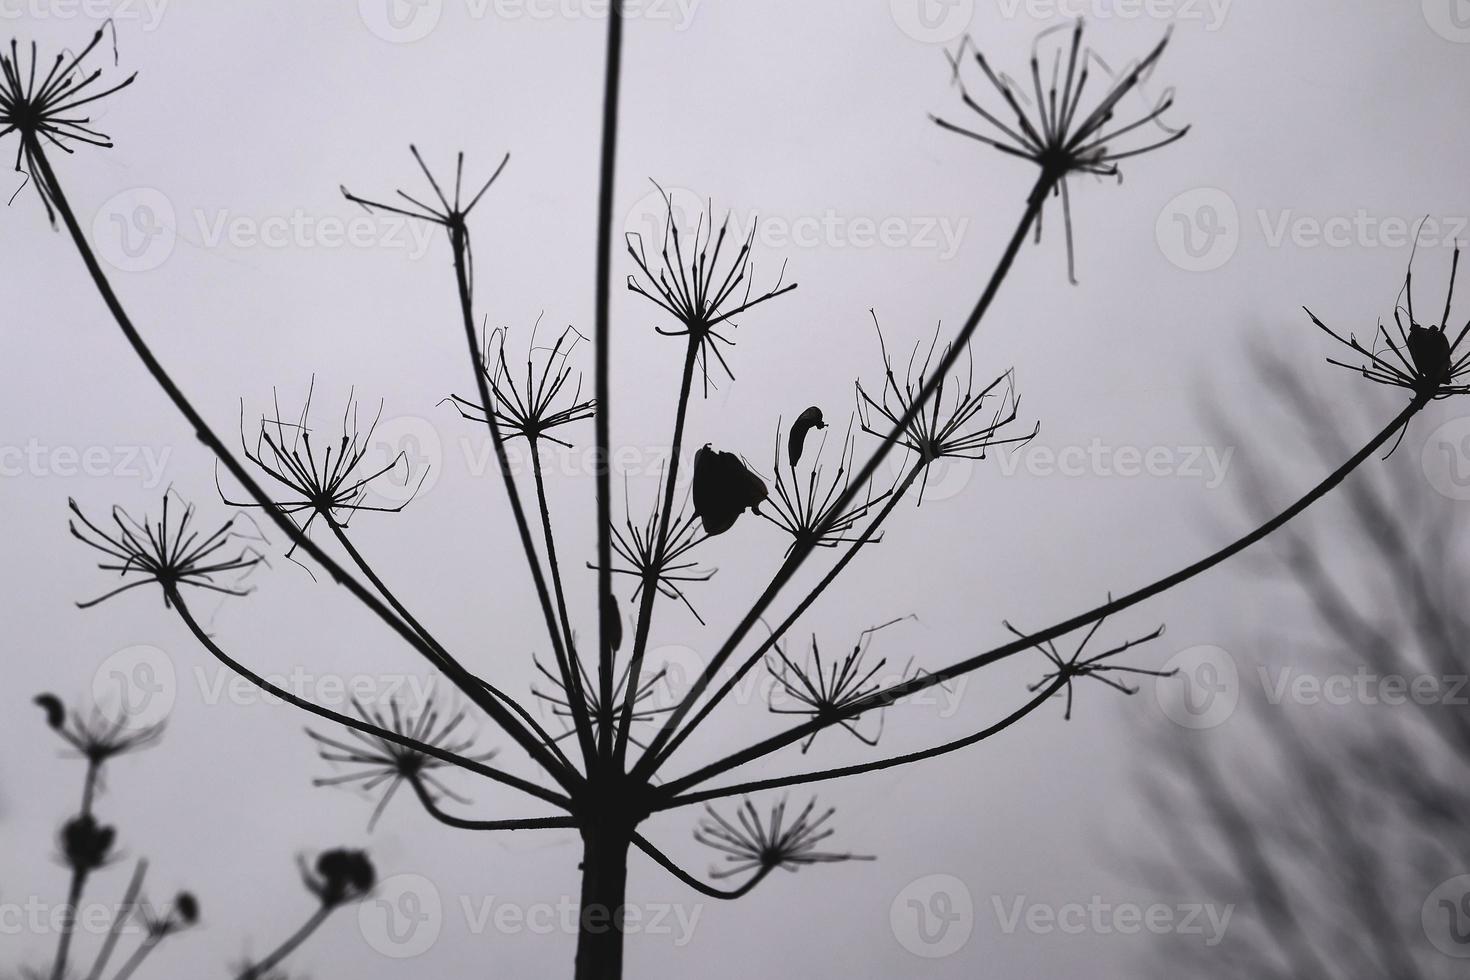 Artwork of wild hogweed in winter sky. Abstract black and white photography art. photo